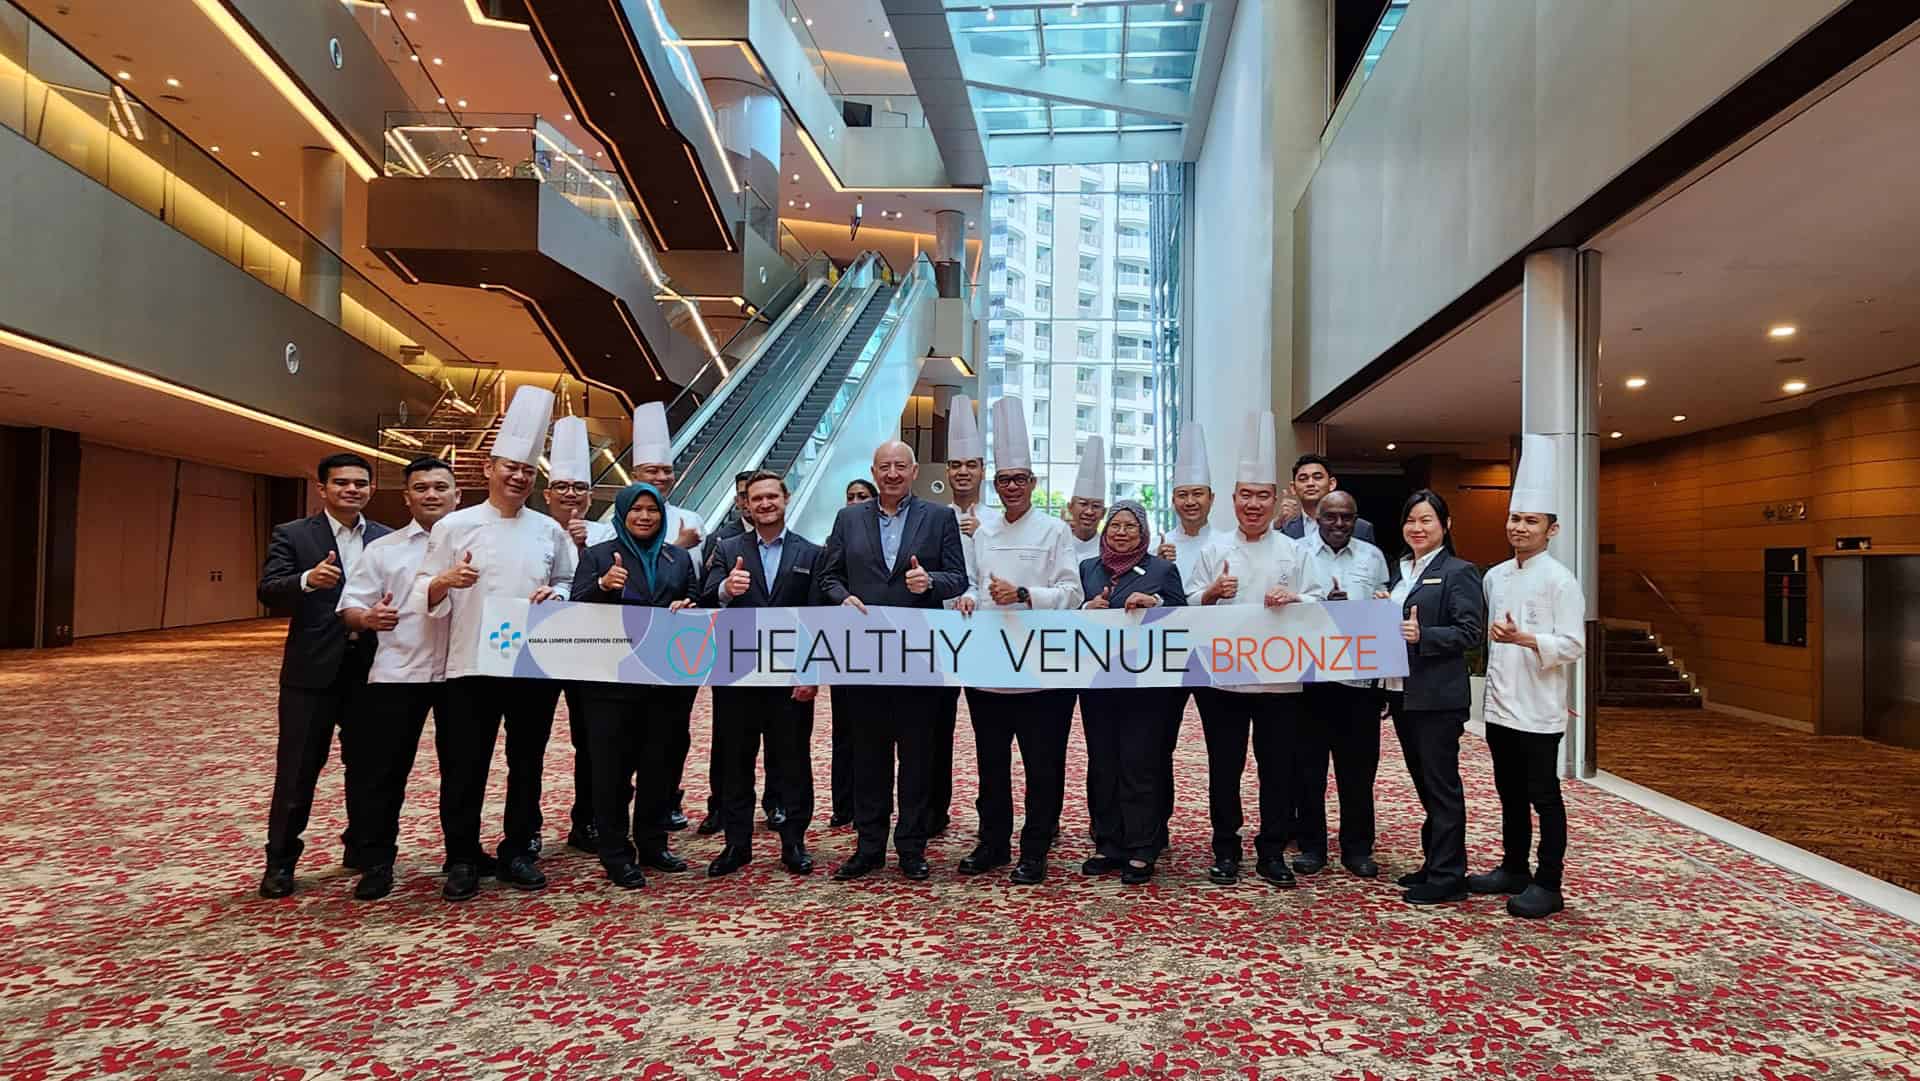 Kuala Lumpur Convention Centre is Malaysia’s First Certified Healthy Venue!